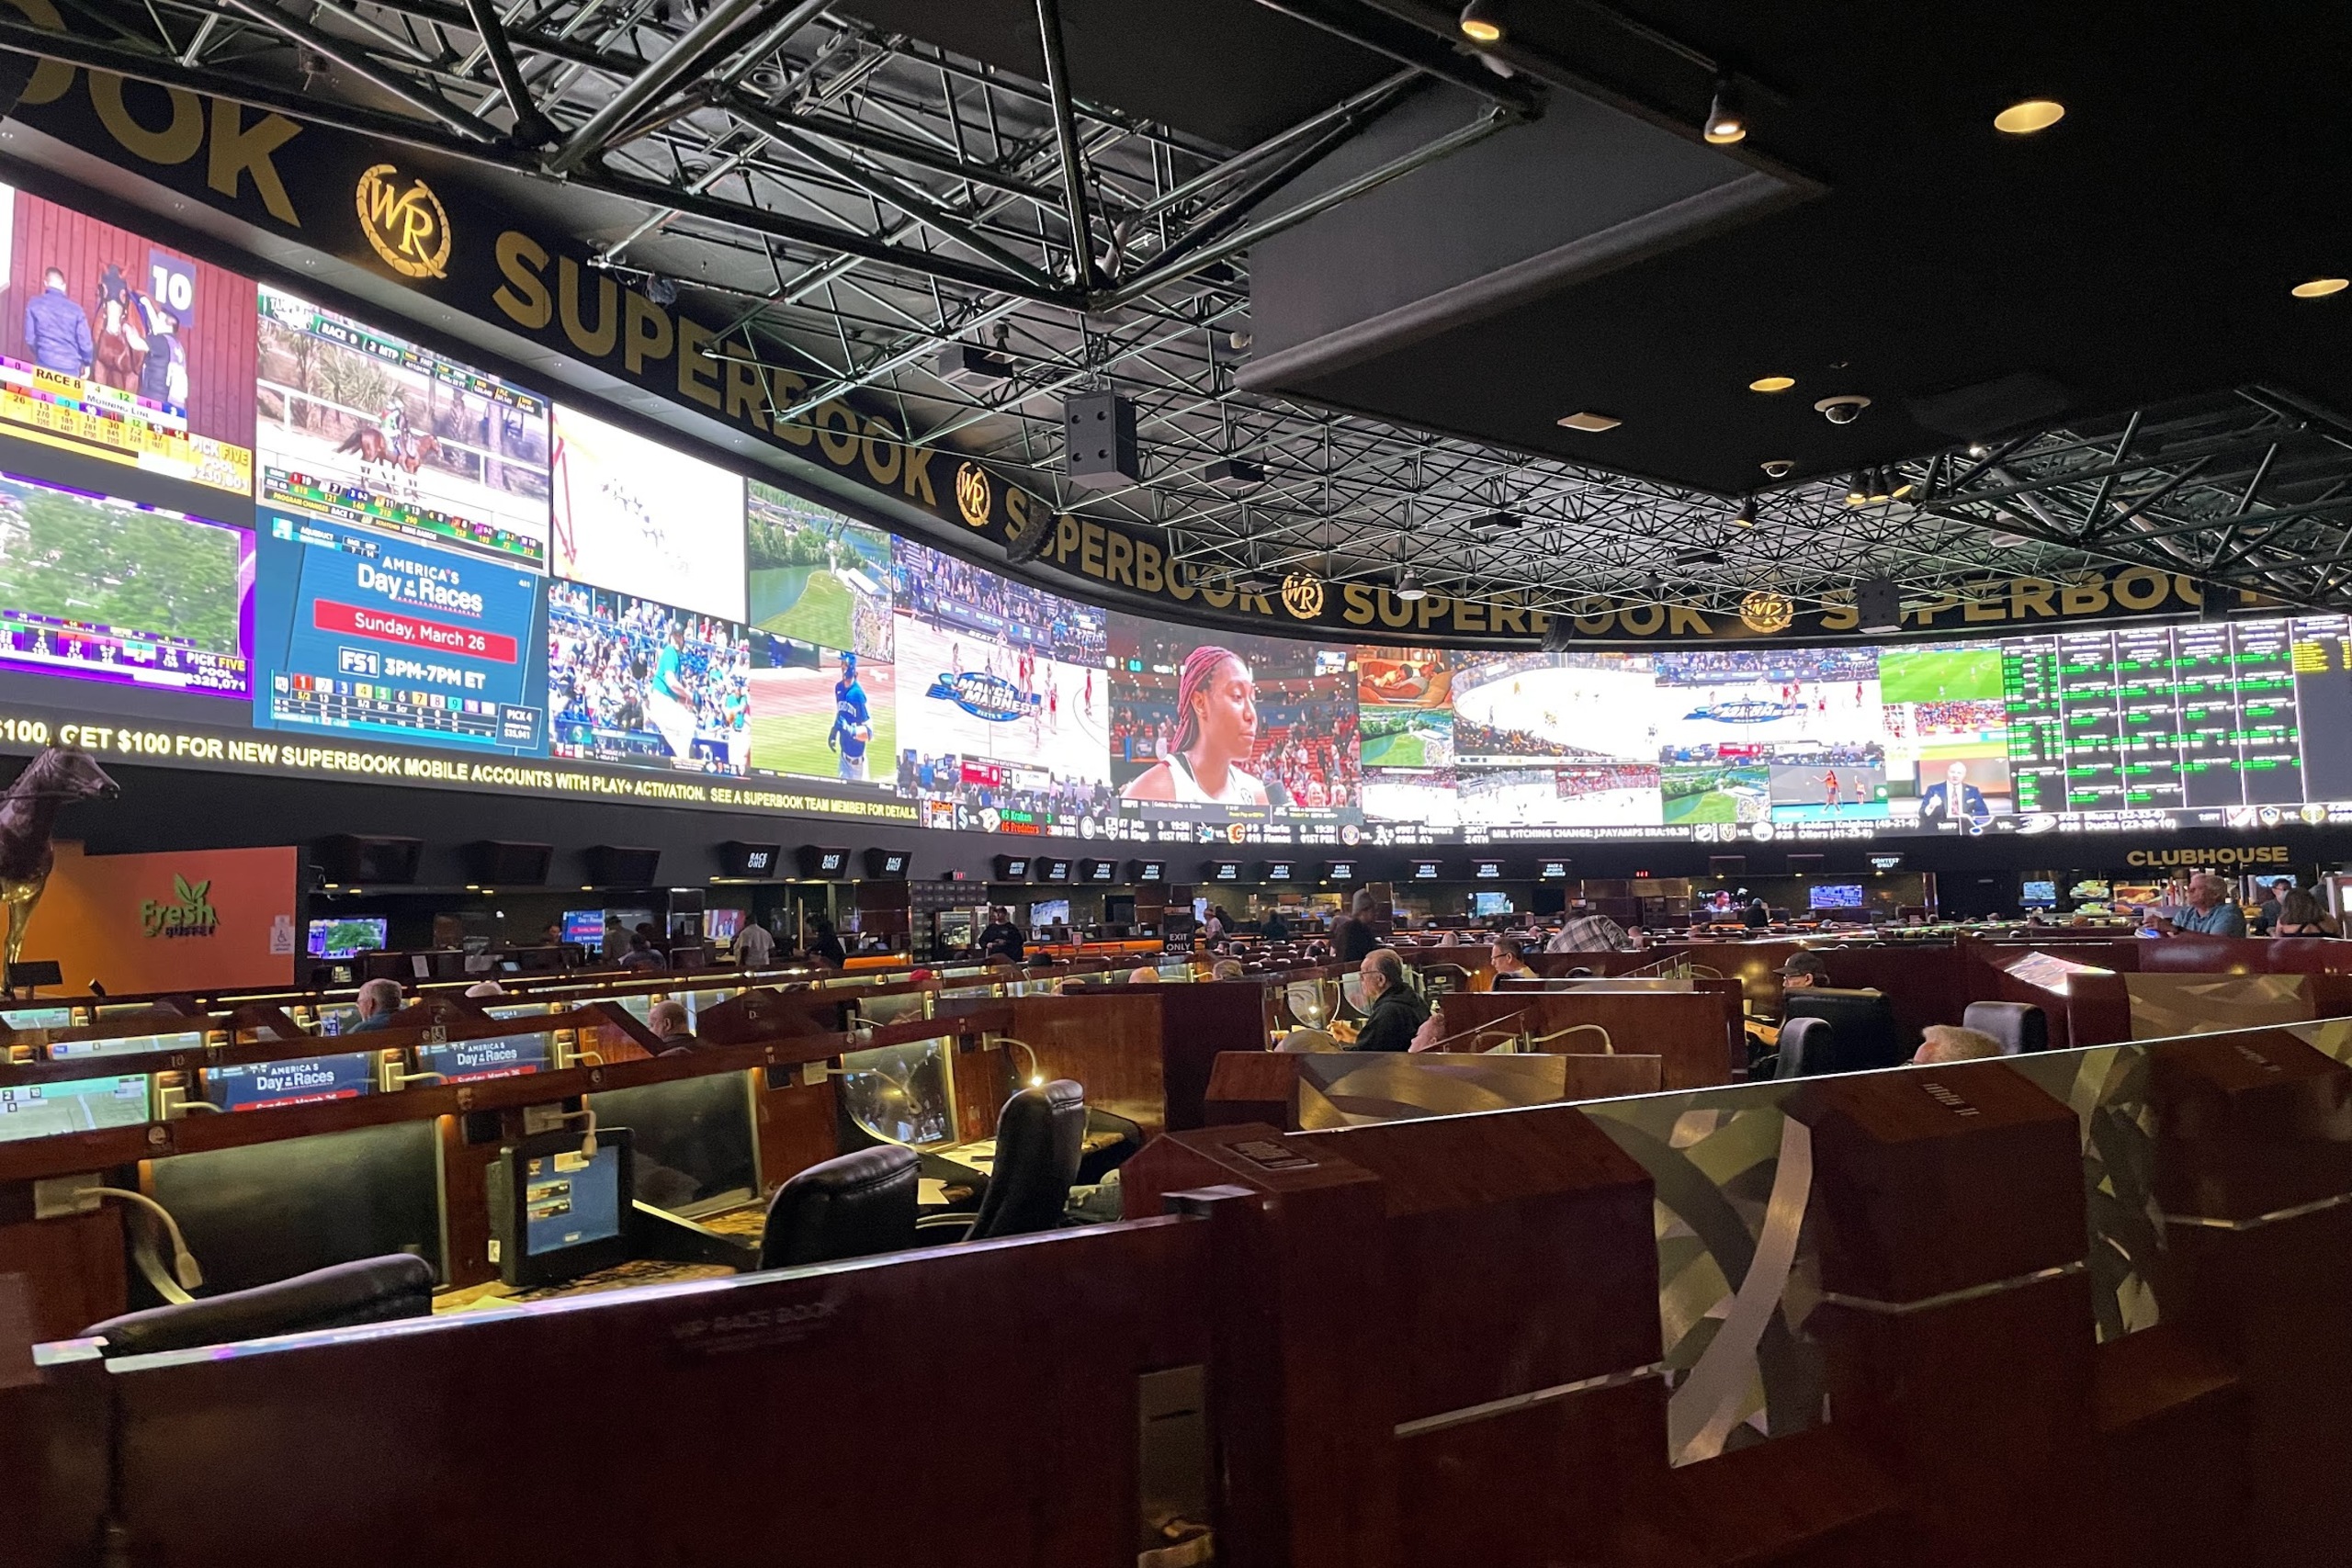 The 10 Best Las Vegas Sportsbooks for Betting on March Madness